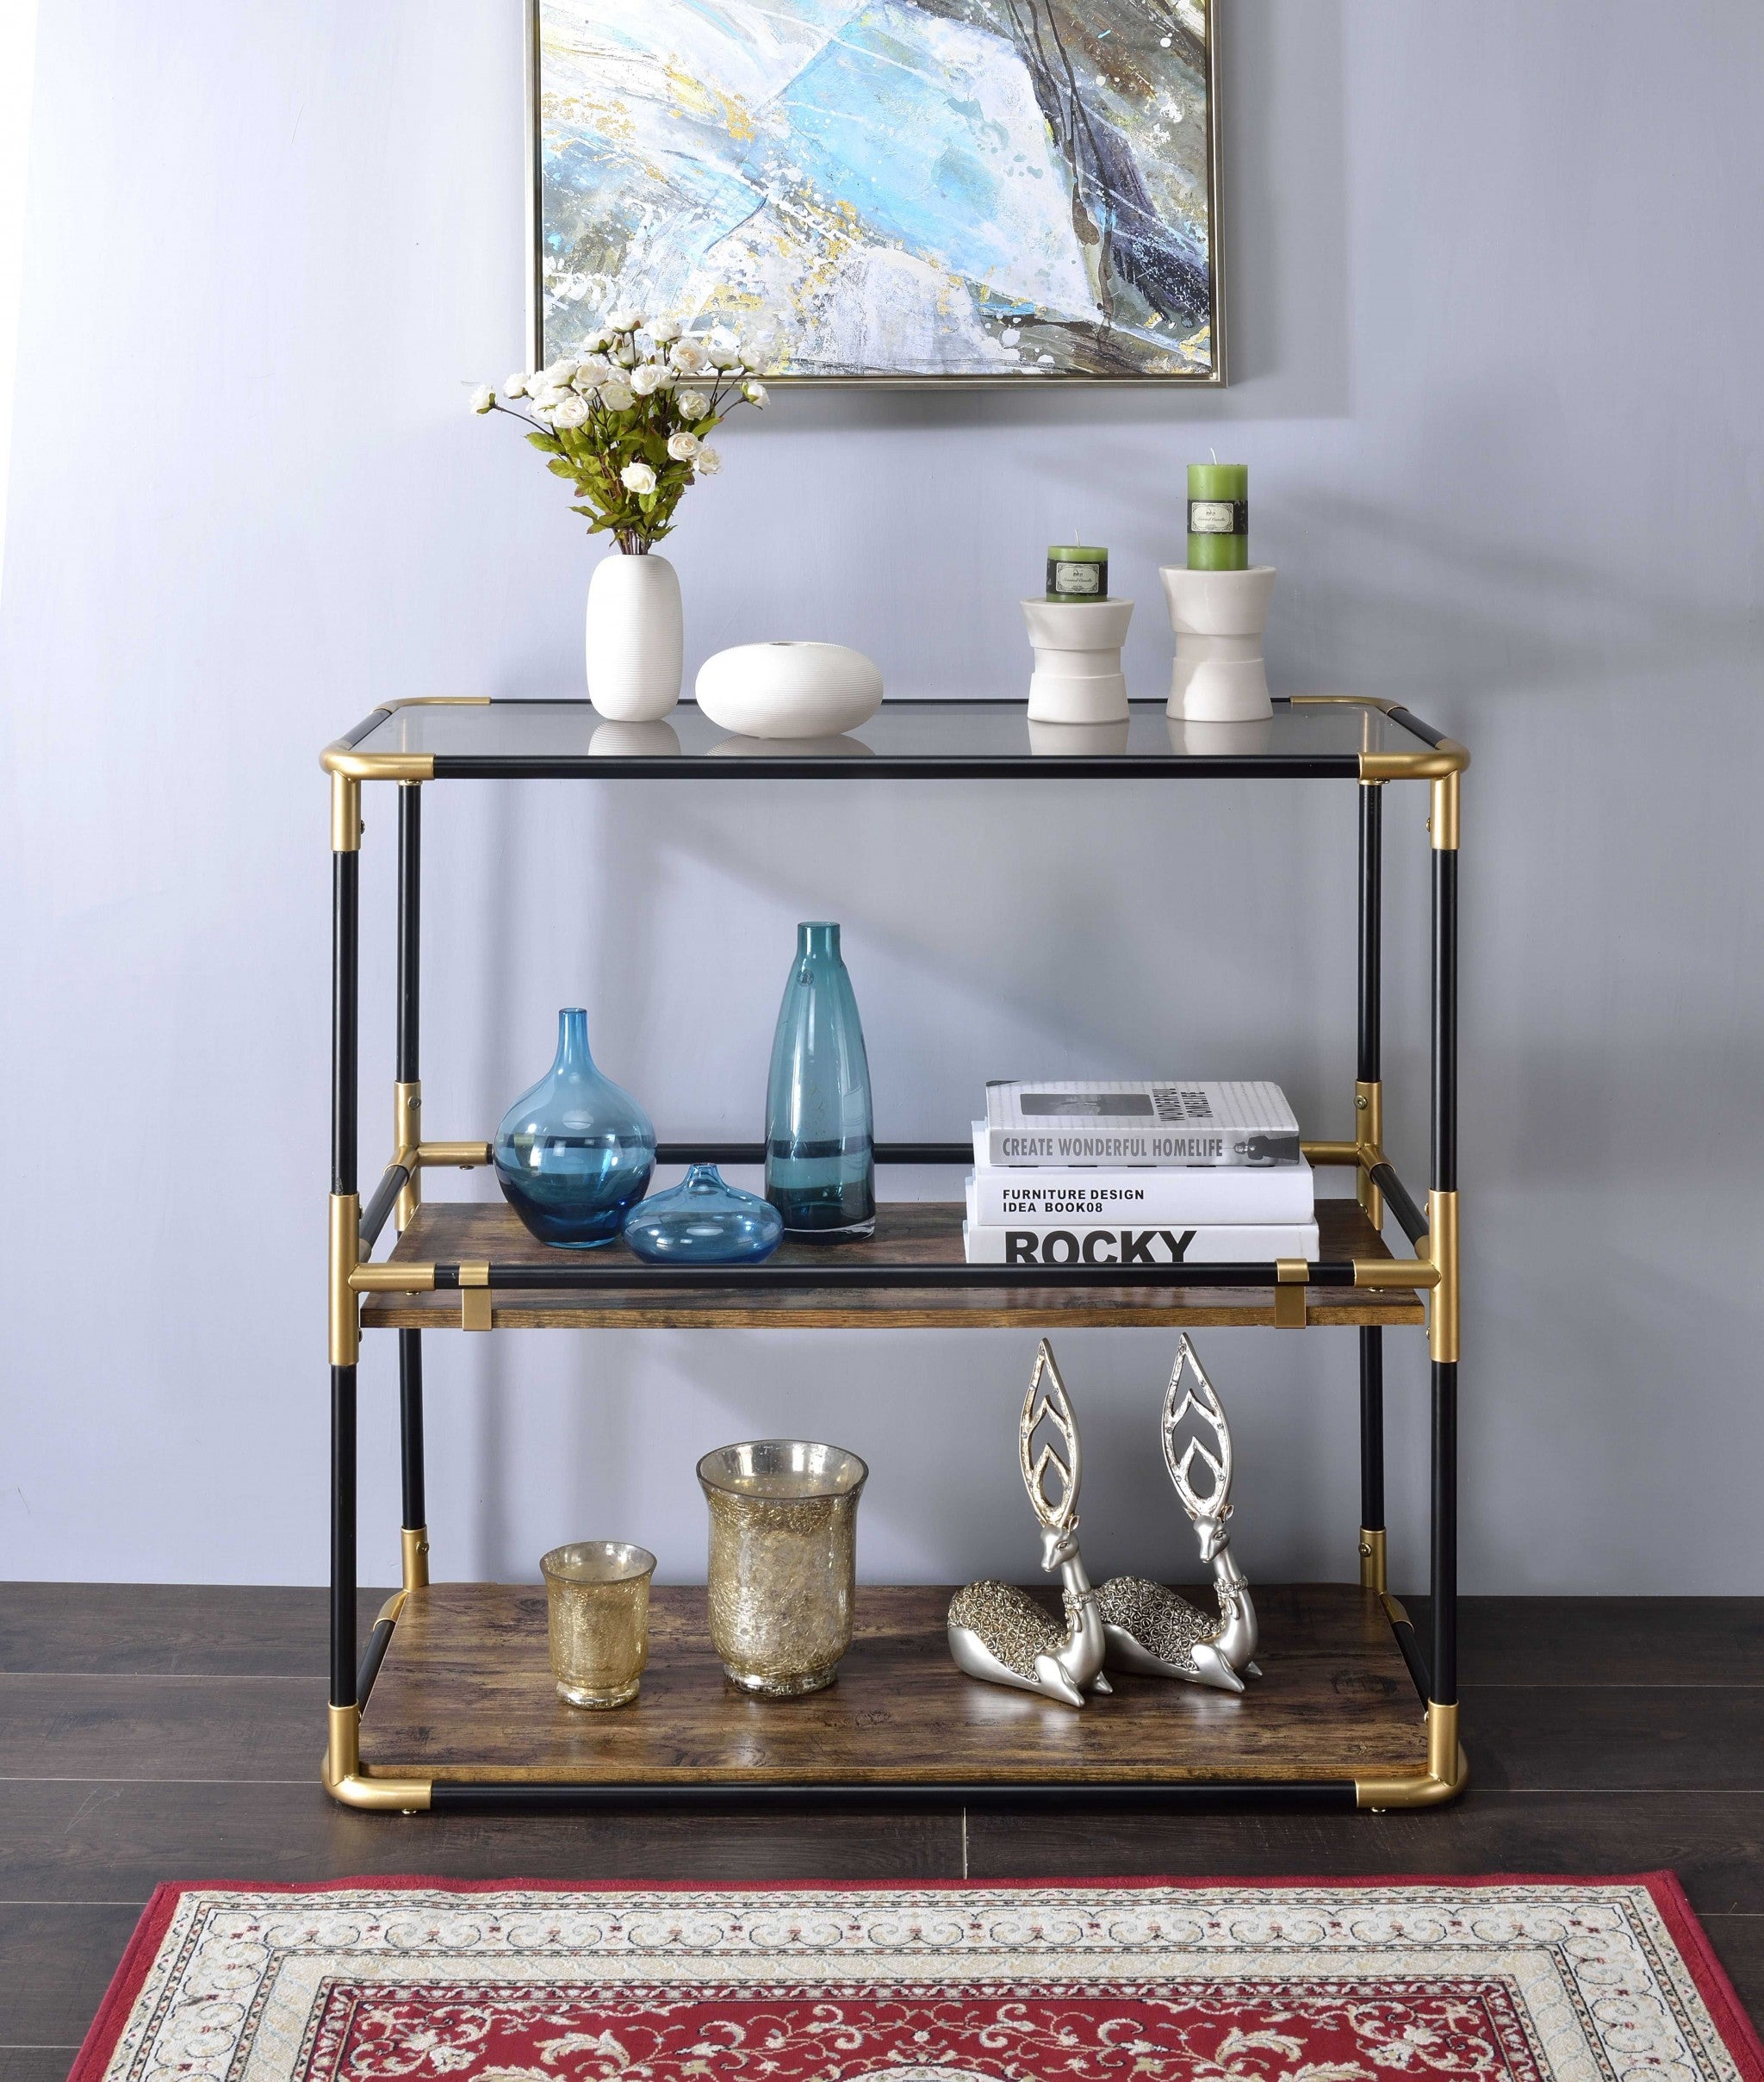 33" Black and Gold And Clear Glass End Table With Two Shelves With Magazine Holder